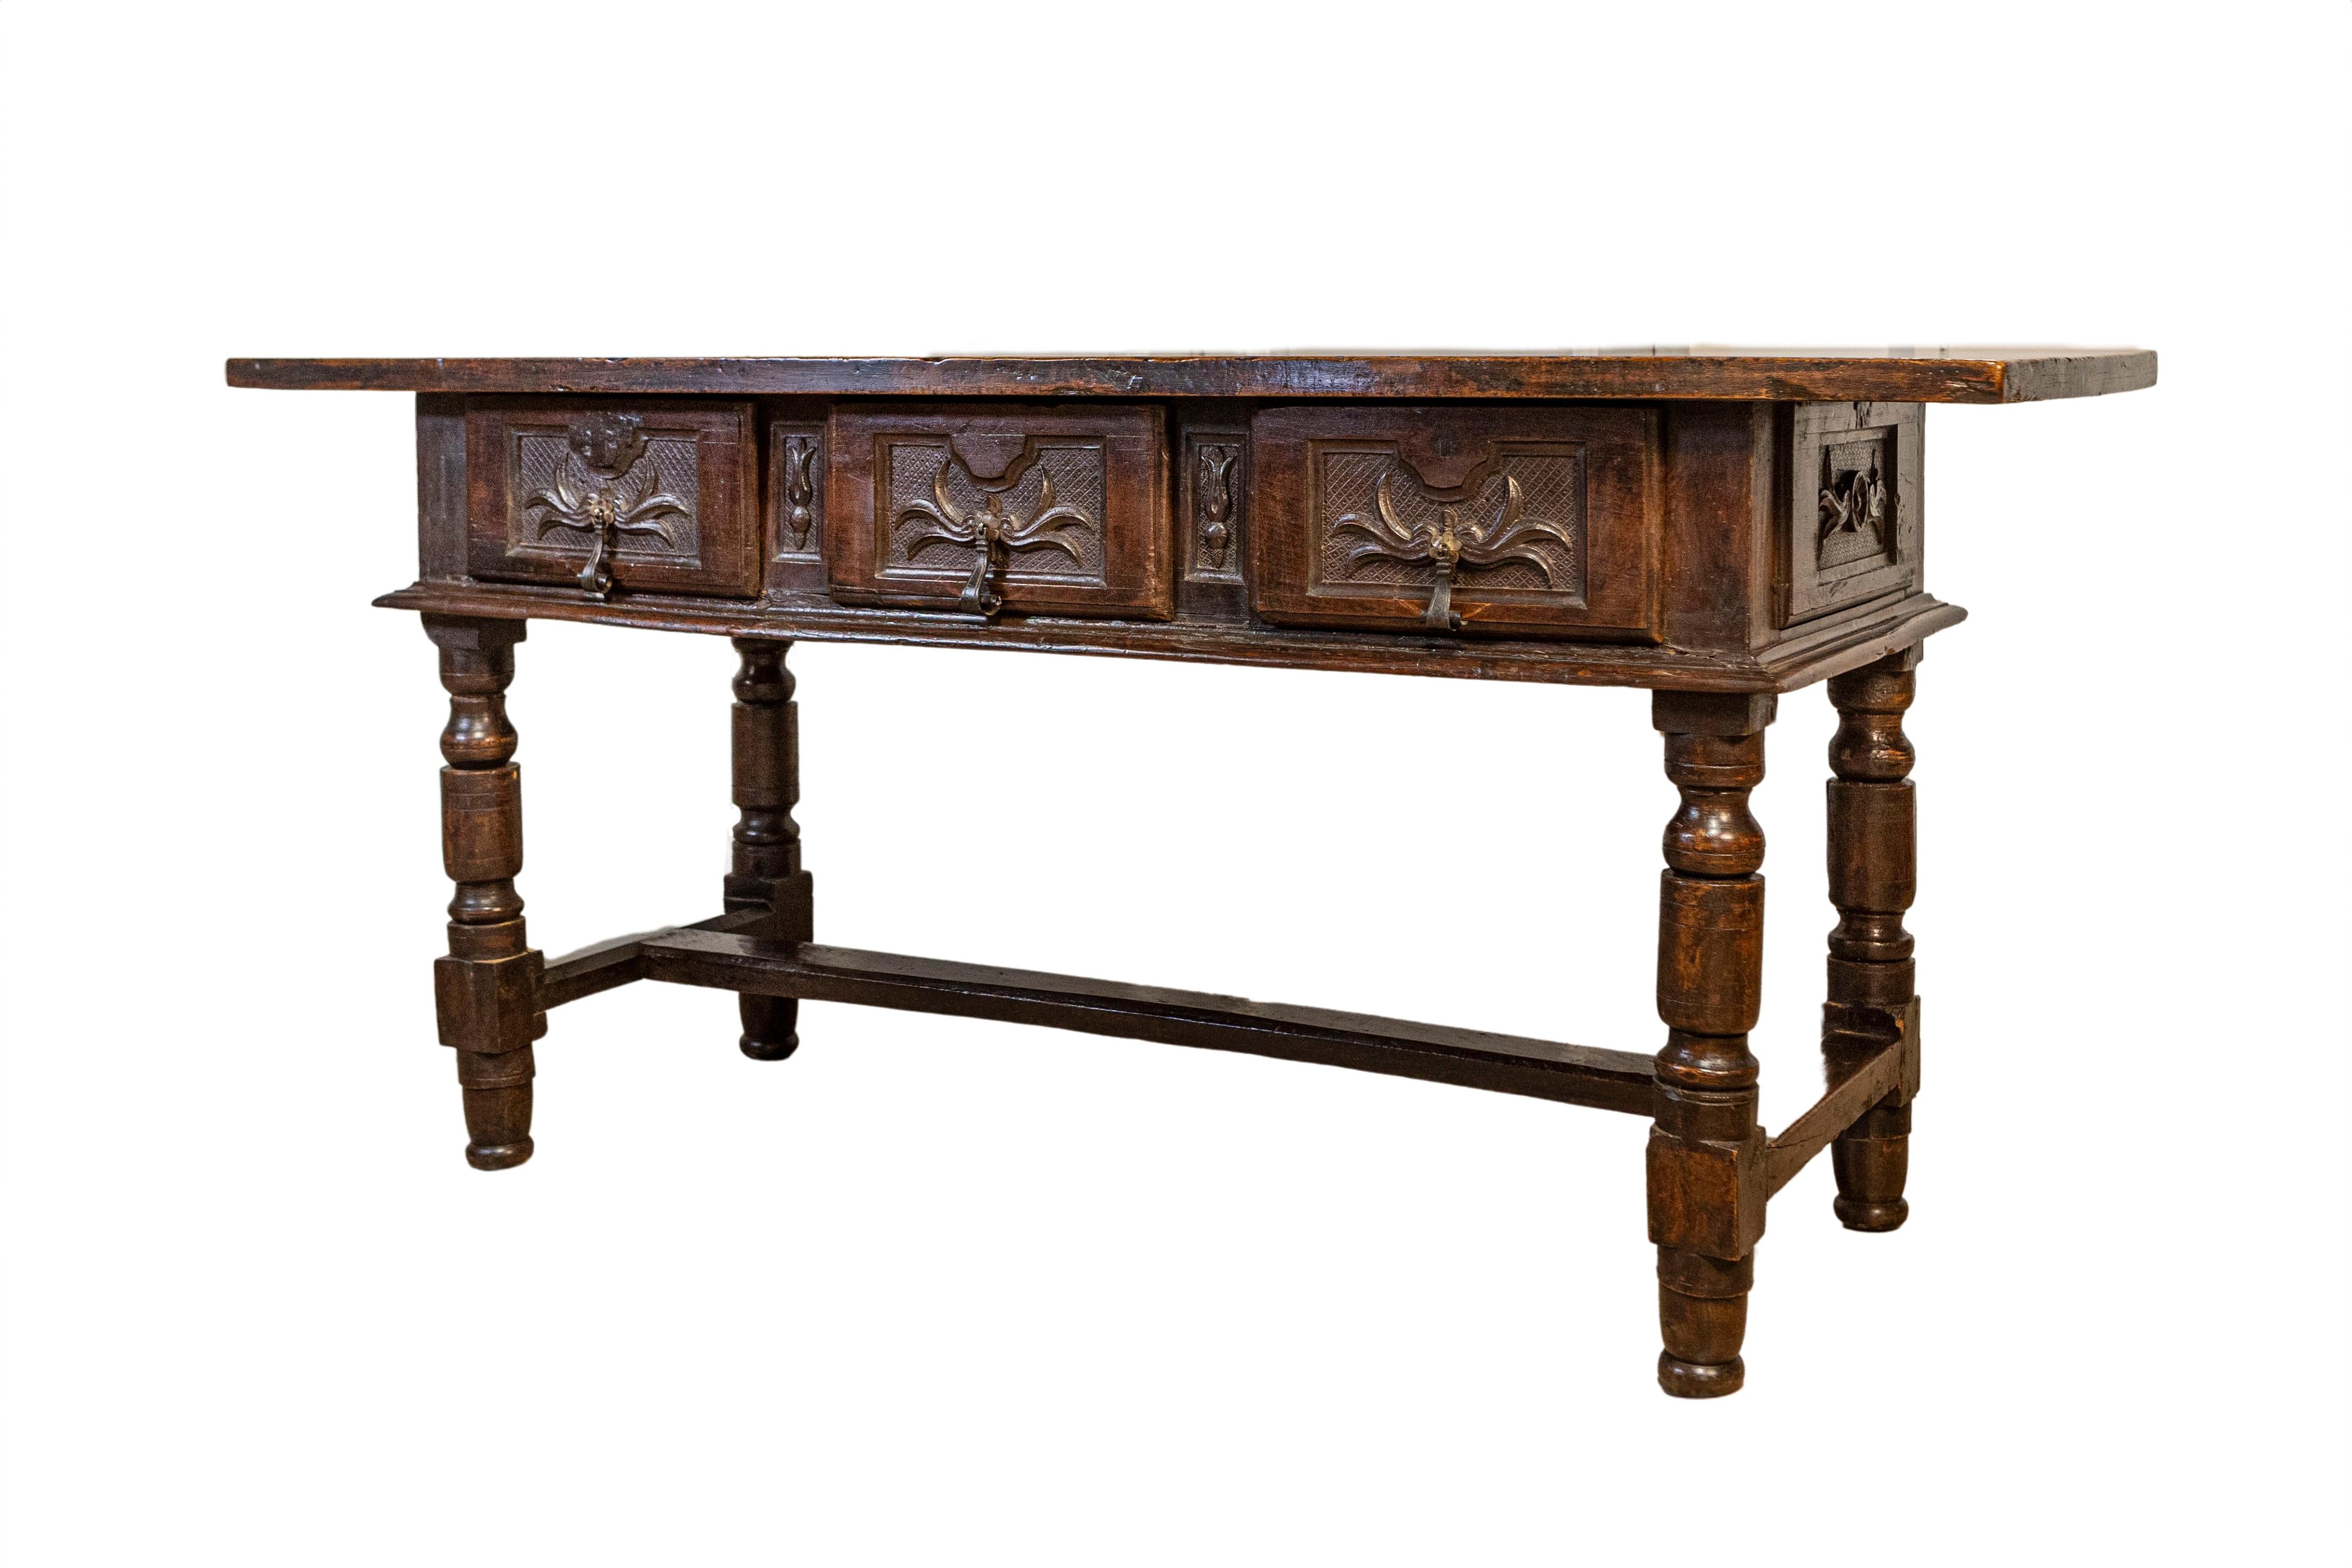 Spanish Baroque 17th Century Walnut Table with Carved Drawers and Turned Legs For Sale 2